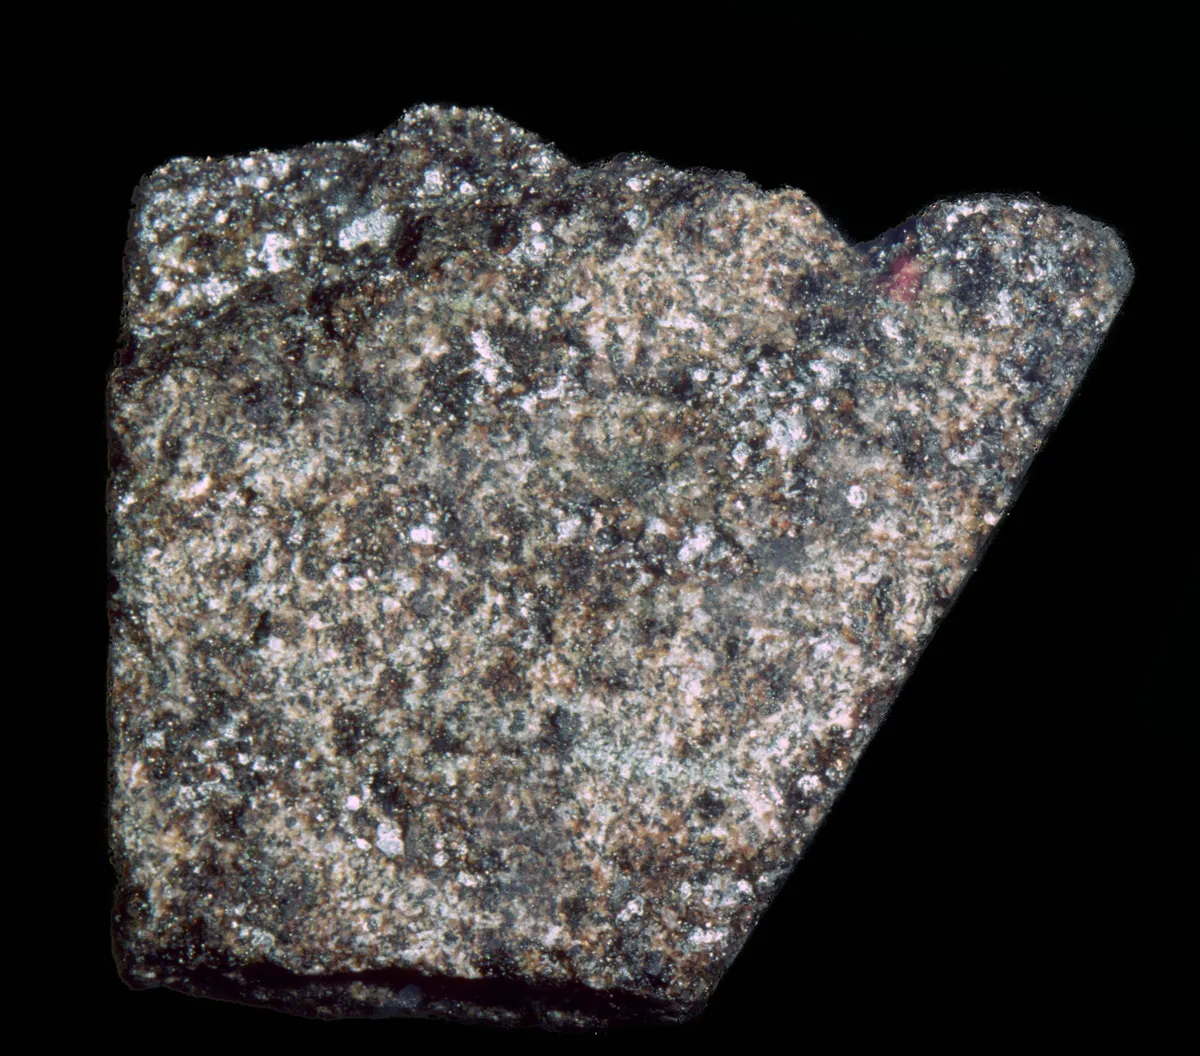 A sample of basalt collected on the Moon during the Apollo 14 mission and brought back to Earth. Photo by CM Dixon/Print Collector/Getty Images)